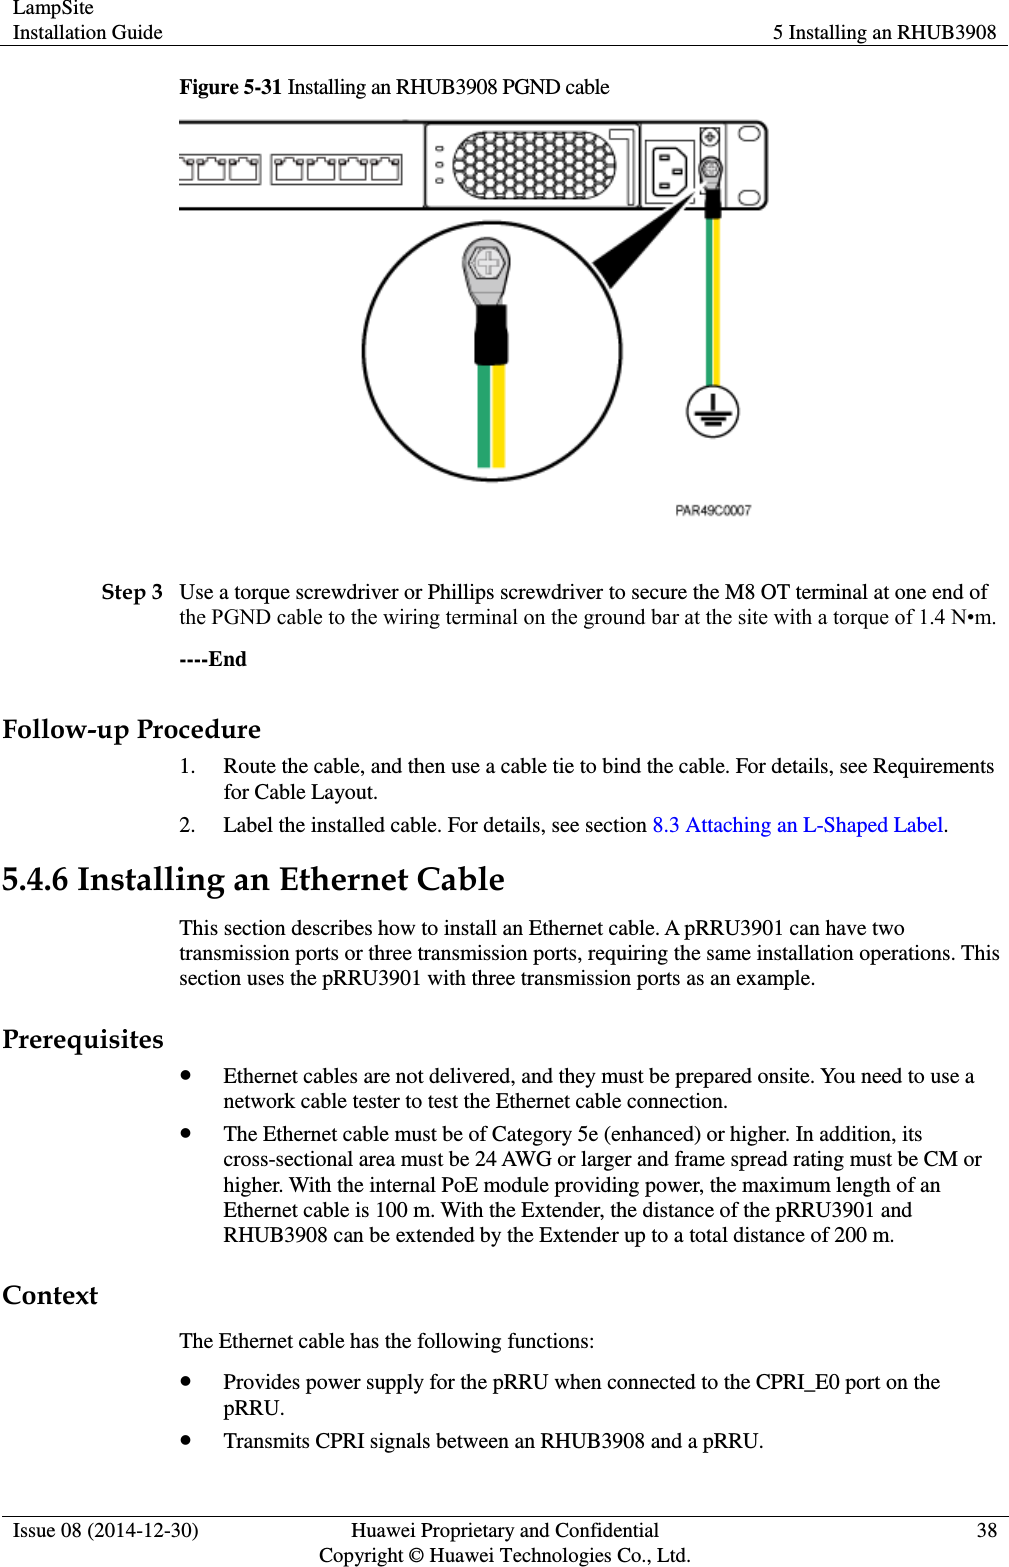 LampSite Installation Guide 5 Installing an RHUB3908  Issue 08 (2014-12-30) Huawei Proprietary and Confidential                                     Copyright © Huawei Technologies Co., Ltd. 38  Figure 5-31 Installing an RHUB3908 PGND cable   Step 3 Use a torque screwdriver or Phillips screwdriver to secure the M8 OT terminal at one end of the PGND cable to the wiring terminal on the ground bar at the site with a torque of 1.4 N•m.   ----End Follow-up Procedure 1. Route the cable, and then use a cable tie to bind the cable. For details, see Requirements for Cable Layout. 2. Label the installed cable. For details, see section 8.3 Attaching an L-Shaped Label. 5.4.6 Installing an Ethernet Cable This section describes how to install an Ethernet cable. A pRRU3901 can have two transmission ports or three transmission ports, requiring the same installation operations. This section uses the pRRU3901 with three transmission ports as an example. Prerequisites  Ethernet cables are not delivered, and they must be prepared onsite. You need to use a network cable tester to test the Ethernet cable connection.  The Ethernet cable must be of Category 5e (enhanced) or higher. In addition, its cross-sectional area must be 24 AWG or larger and frame spread rating must be CM or higher. With the internal PoE module providing power, the maximum length of an Ethernet cable is 100 m. With the Extender, the distance of the pRRU3901 and RHUB3908 can be extended by the Extender up to a total distance of 200 m. Context The Ethernet cable has the following functions:  Provides power supply for the pRRU when connected to the CPRI_E0 port on the pRRU.  Transmits CPRI signals between an RHUB3908 and a pRRU. 